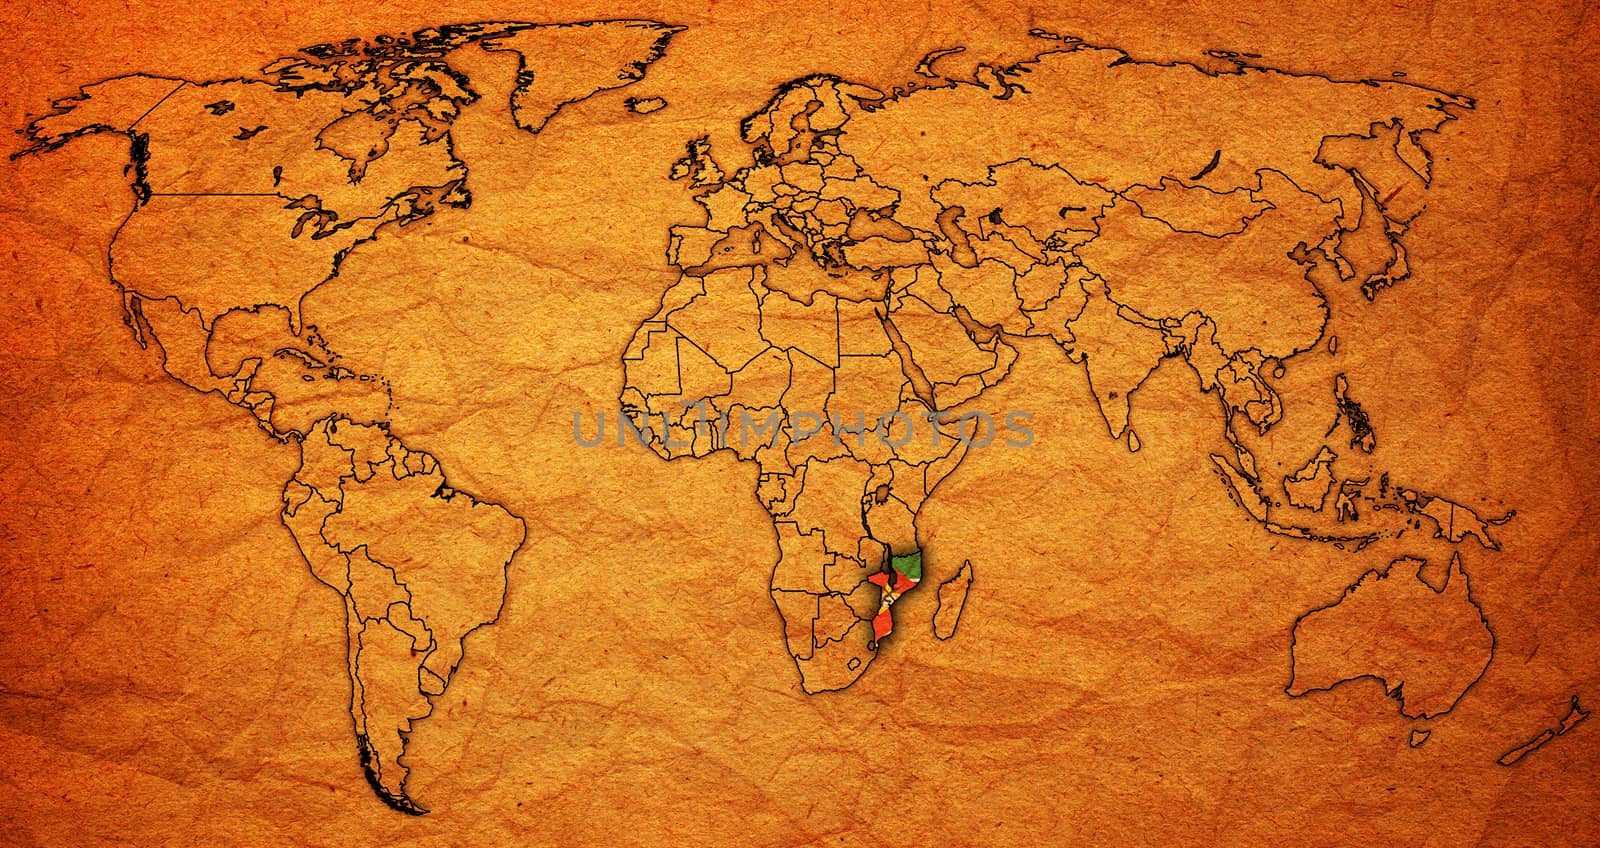 Mozambique territory on world map by michal812